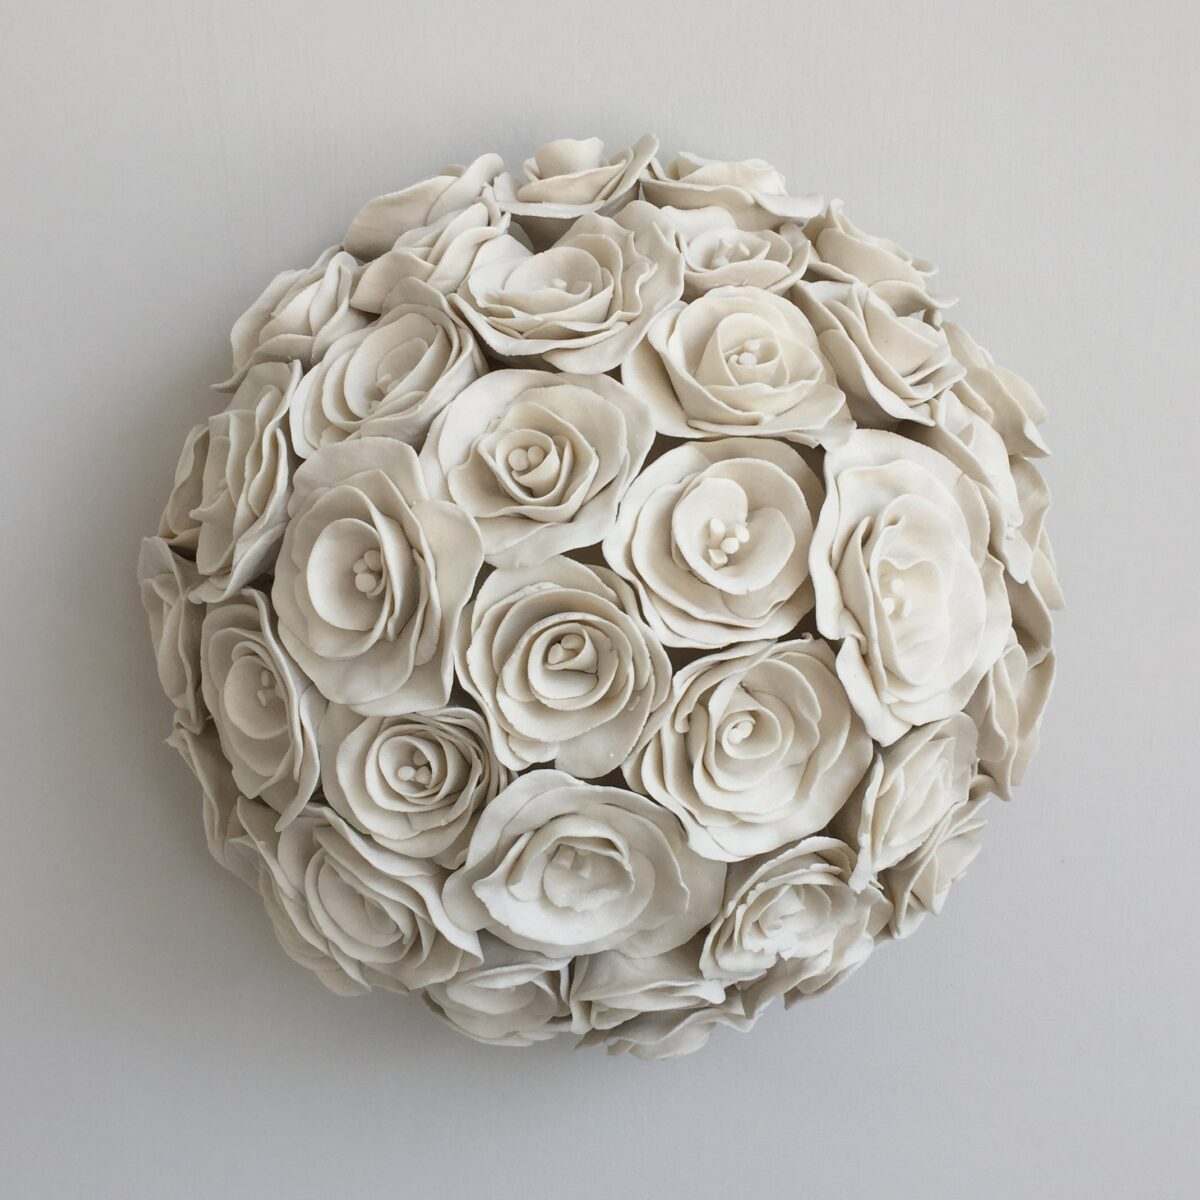 Gorgeous Ceramic Art Pieces Ornate With Intricate Porcelain Flowers By Vanessa Hogge (3)